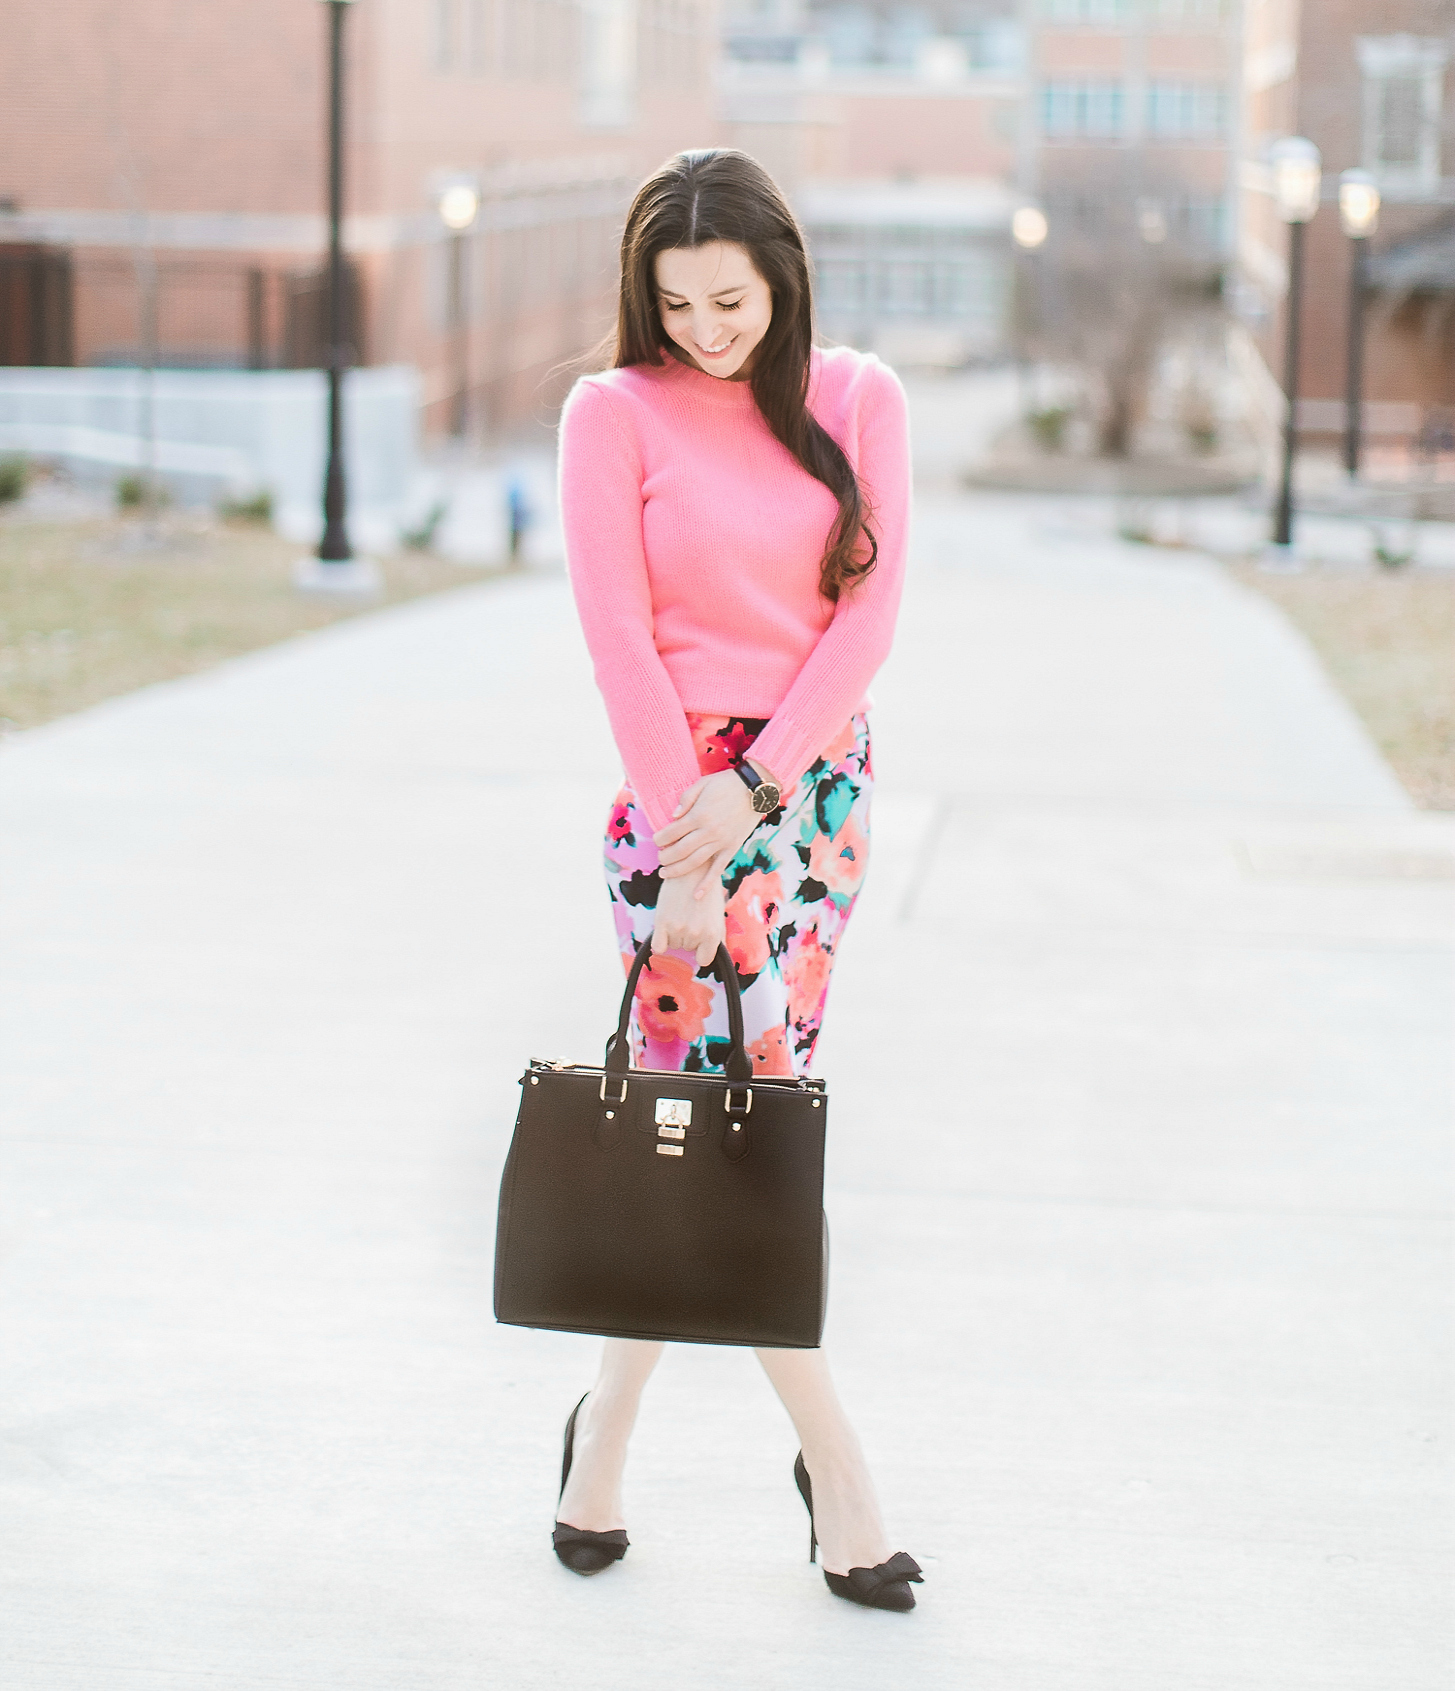 watercolor floral pencil skirt from The Mint Julep Boutique with pink J.Crew Factory crewneck sweater, black bow pumps, Dasein black satchel handbag, and black Daniel Wellington Classic Petite Sheffield watch, how to wear a long pencil skirt, Watercolor Blooms: How to Wear a Floral Pencil Skirt by fashion blogger Stephanie Ziajka from Diary of a Debutante, Catherine Rhodes Photography